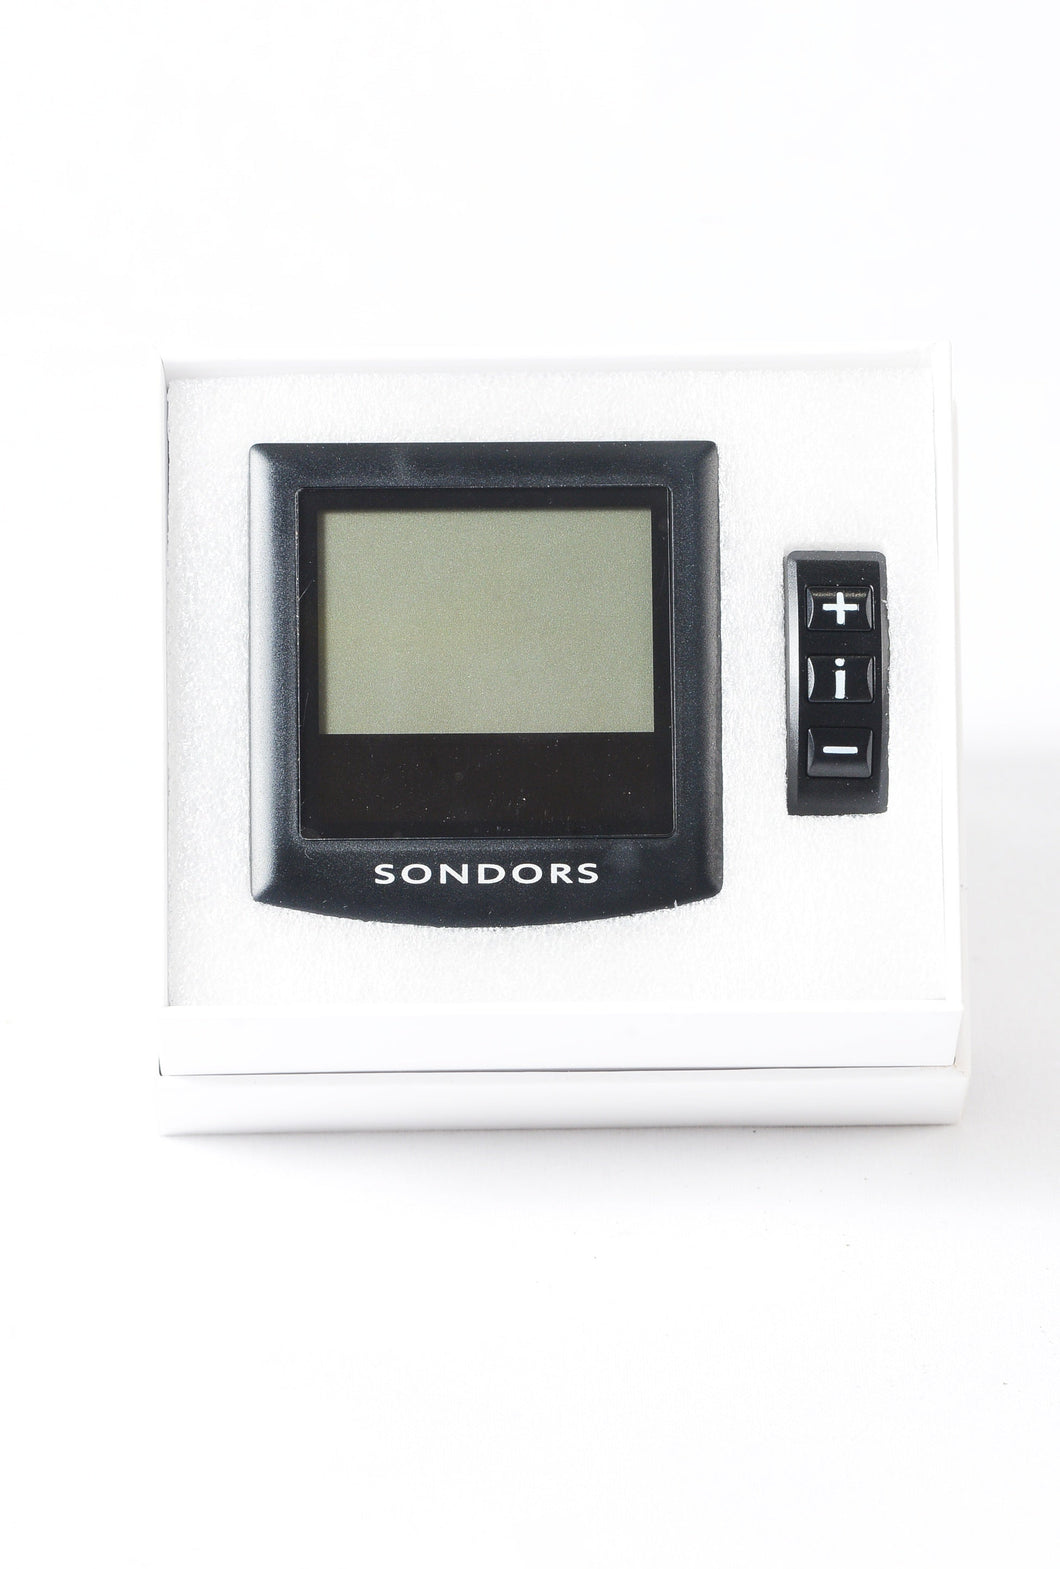 LCD - SONDORS Thin (Delivered December 2017 or Later)